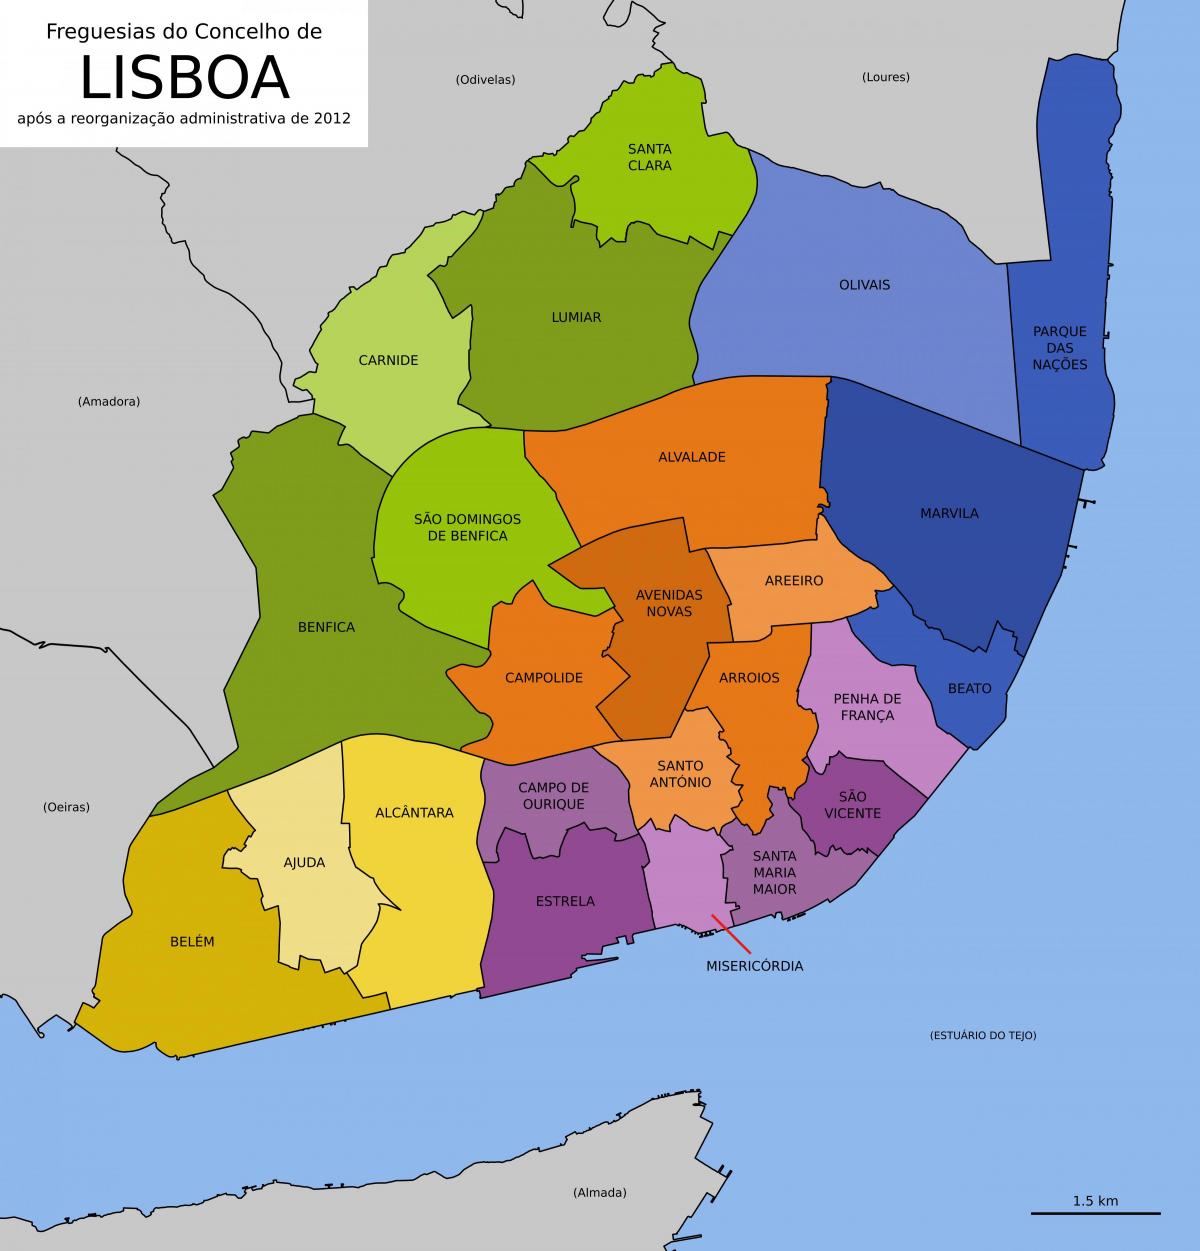 map of lisbon showing districts